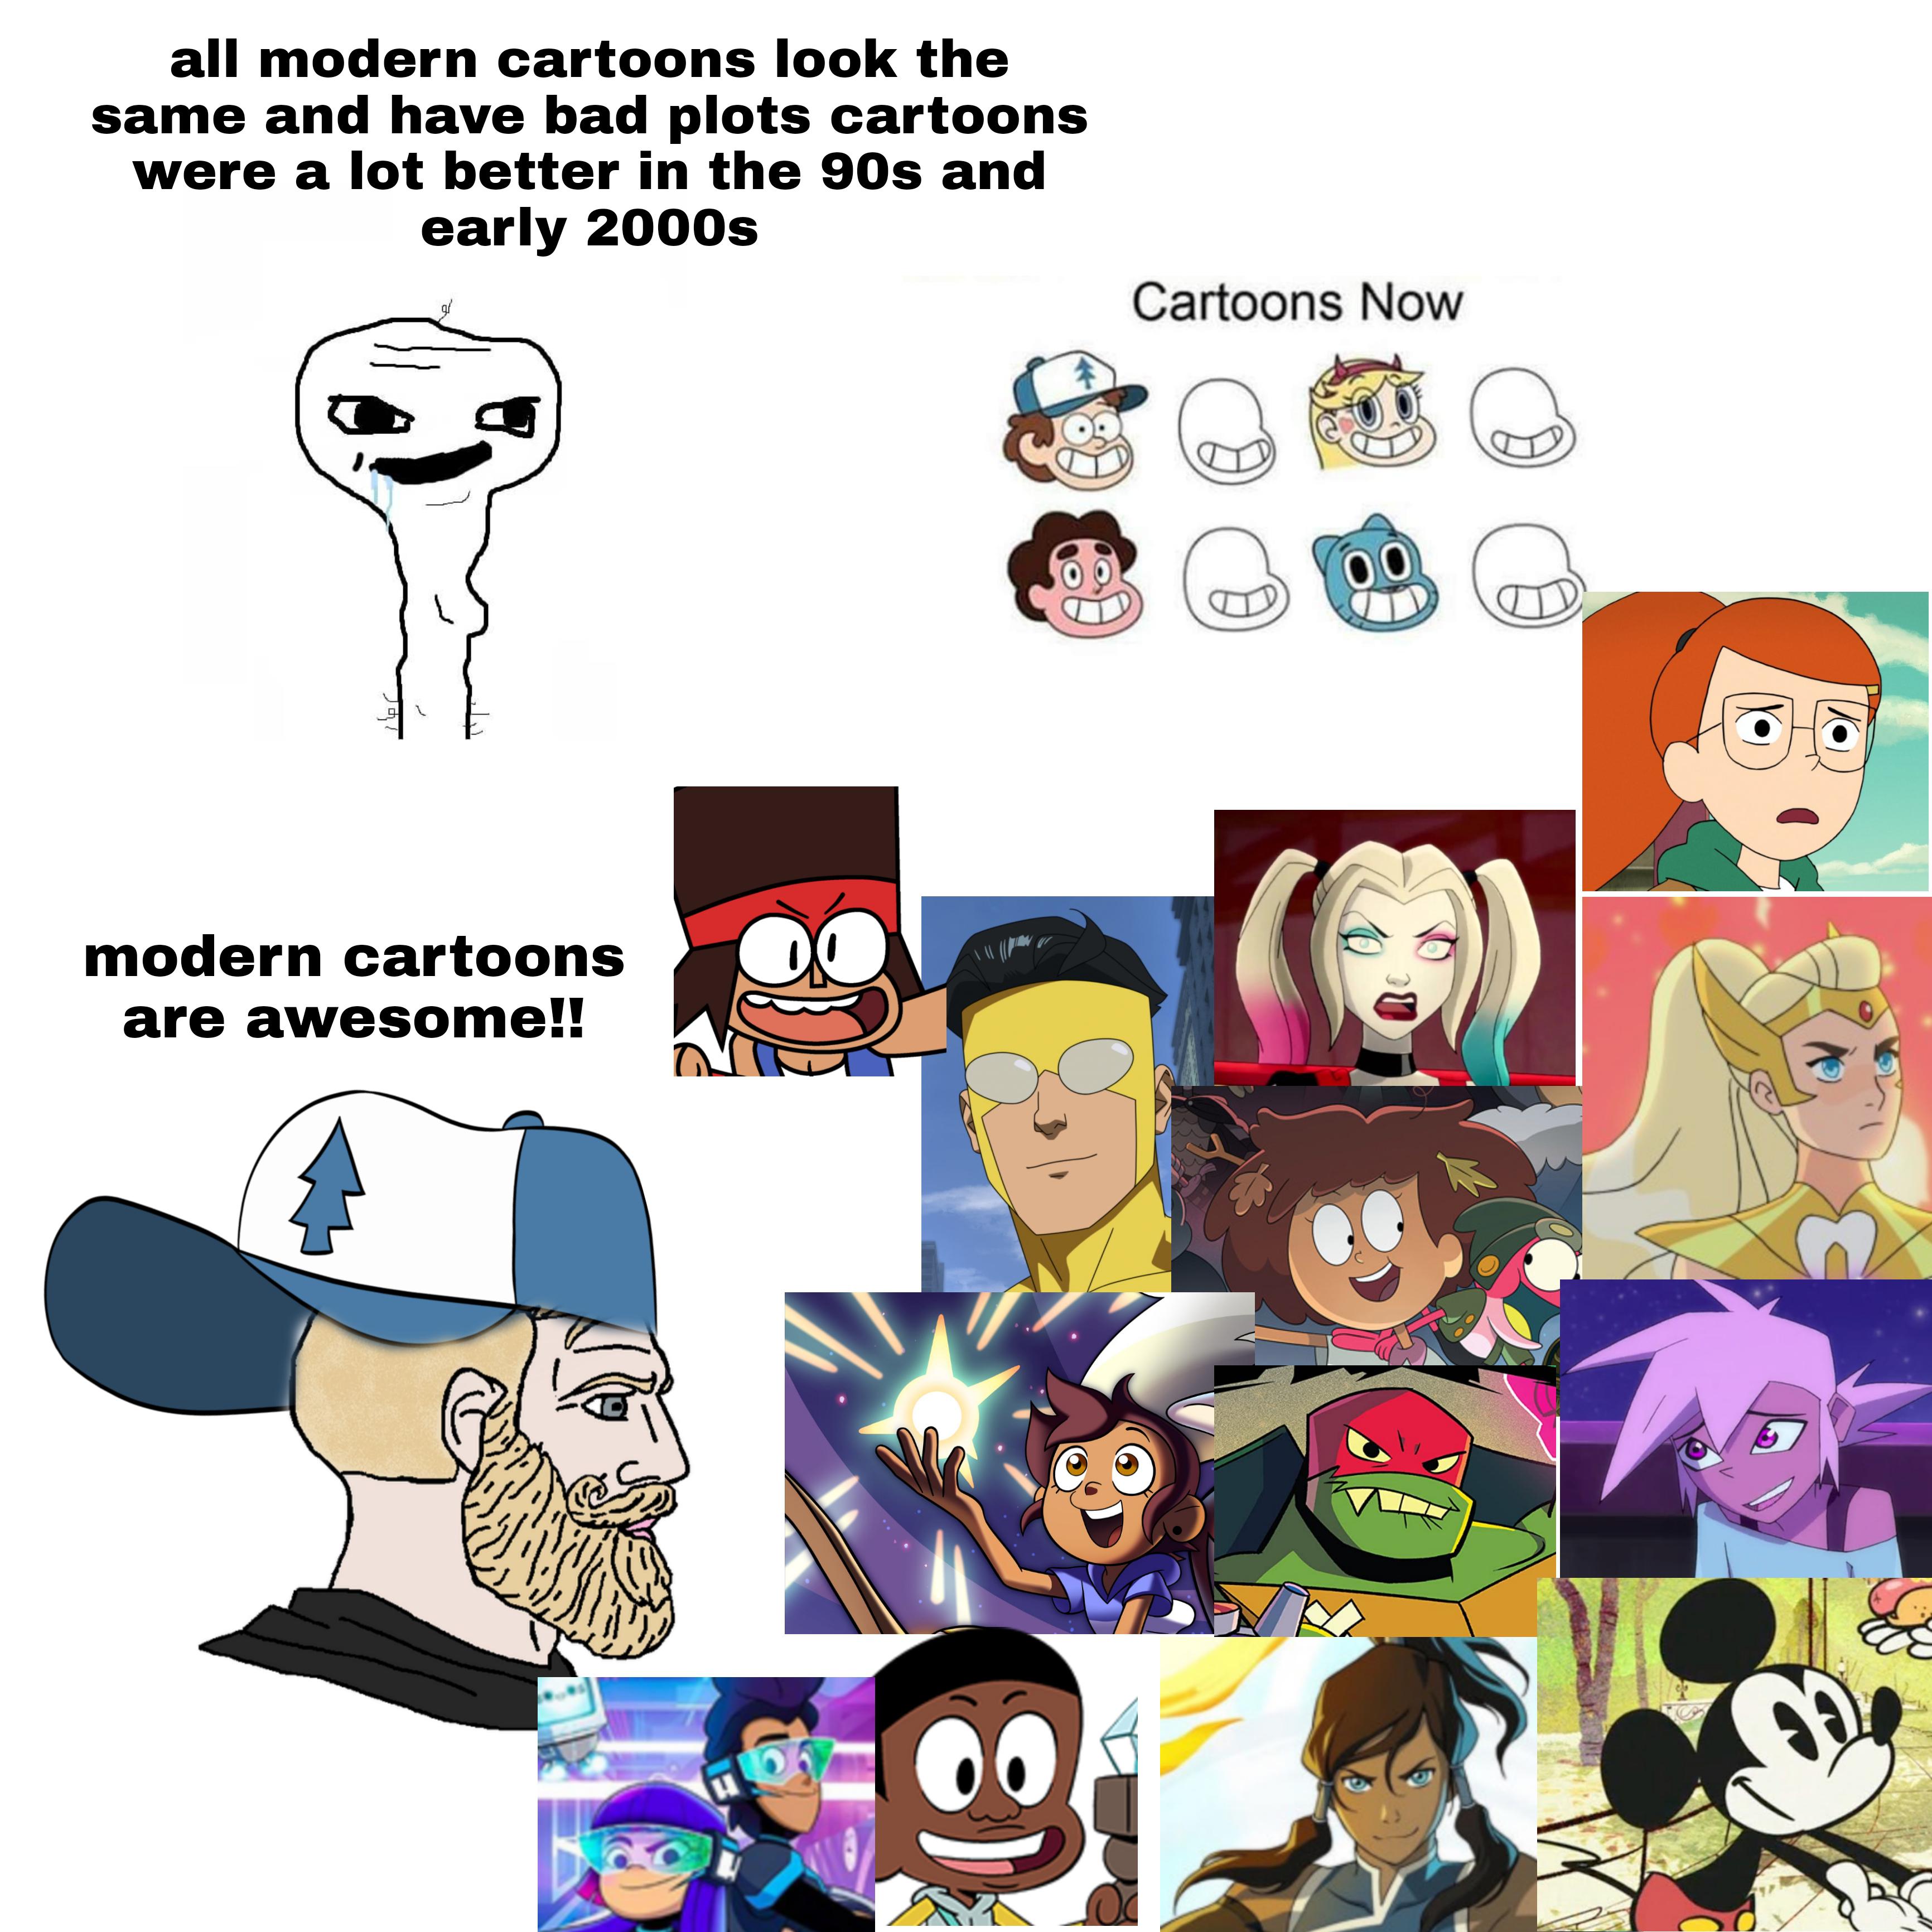 cartoon - all modern cartoons look the same and have bad plots cartoons were a lot better in the 90s and early 2000s Cartoons Now modern cartoons are awesome!! 8